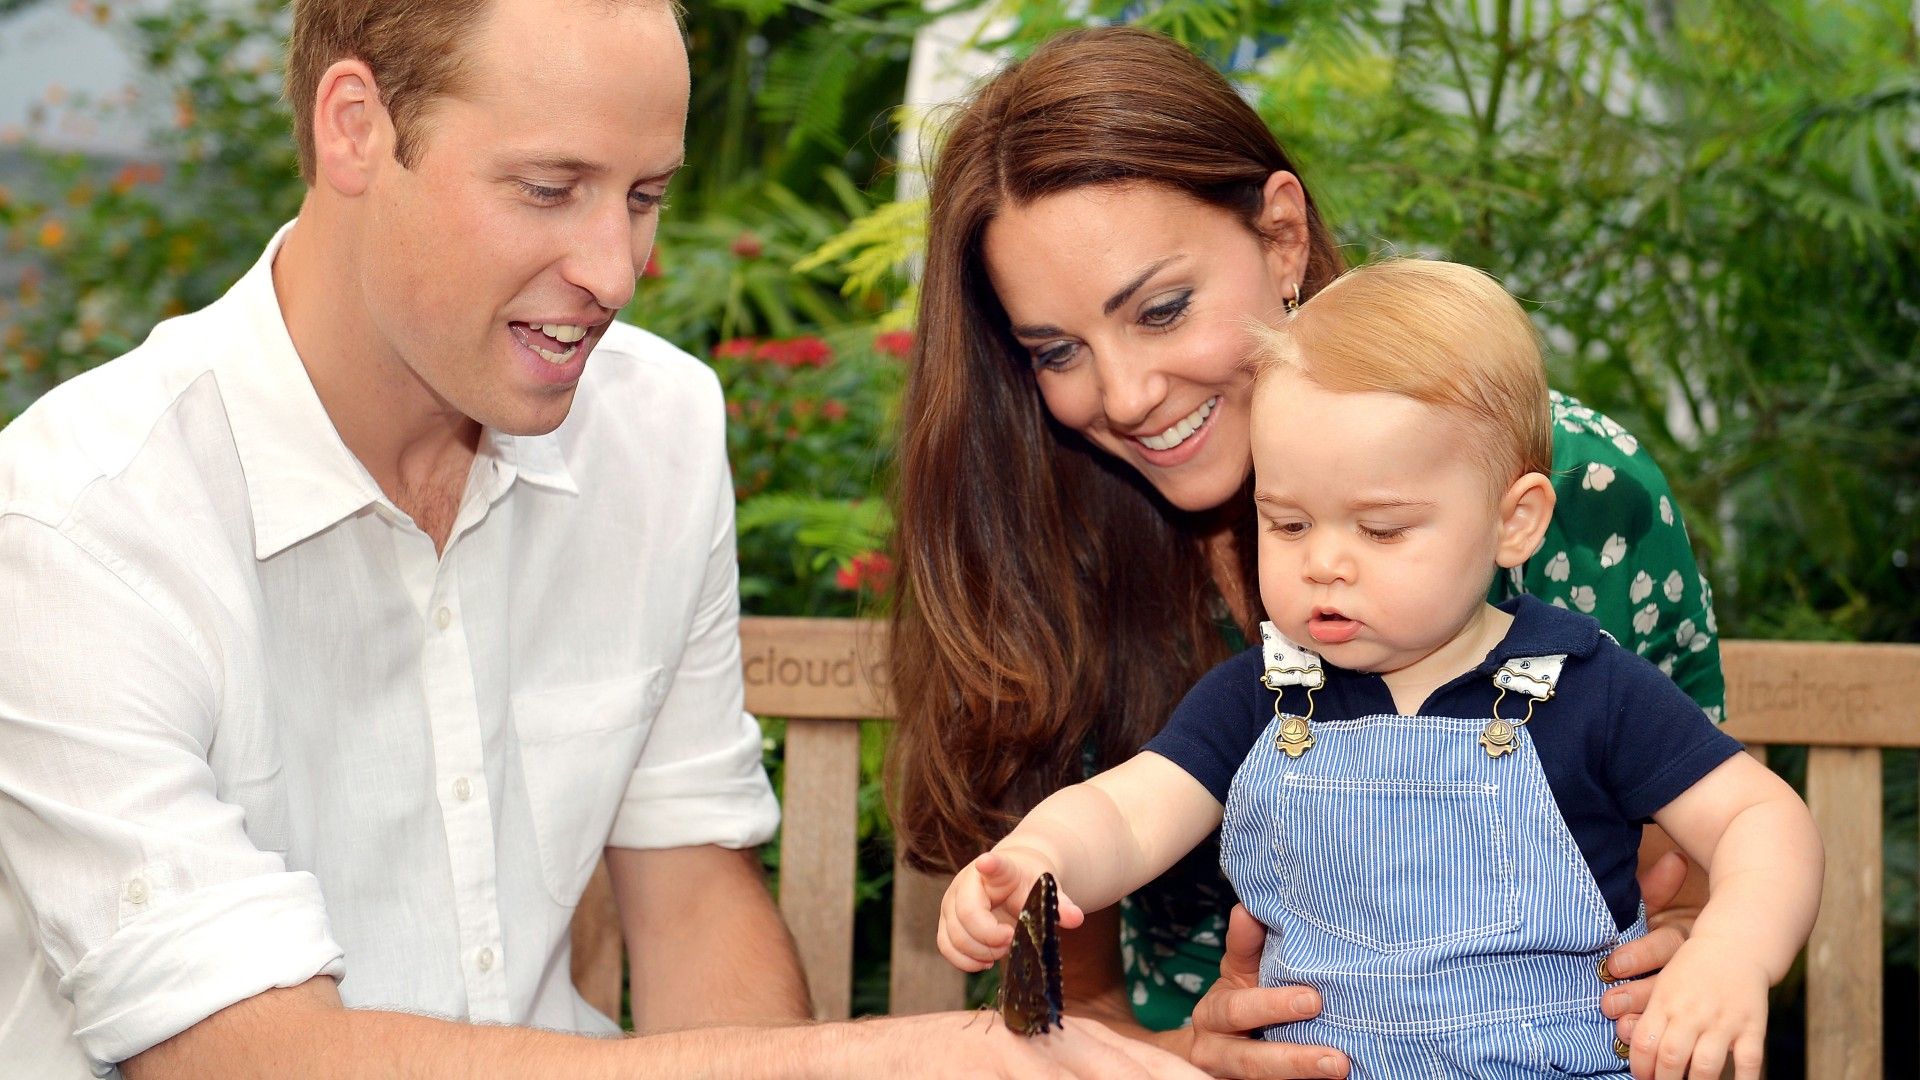 <p>                     Oh, the cuteness.                   </p>                                      <p>                     Prince William and Kate Middleton were still relatively new to the world of parenting in early 2014 when they got to take their son, Prince George, to the Natural History Museum in London.                   </p>                                      <p>                     Part of that special moment as new parents meant getting to see their child discover something new all the time, like George's introductions to butterflies.                   </p>